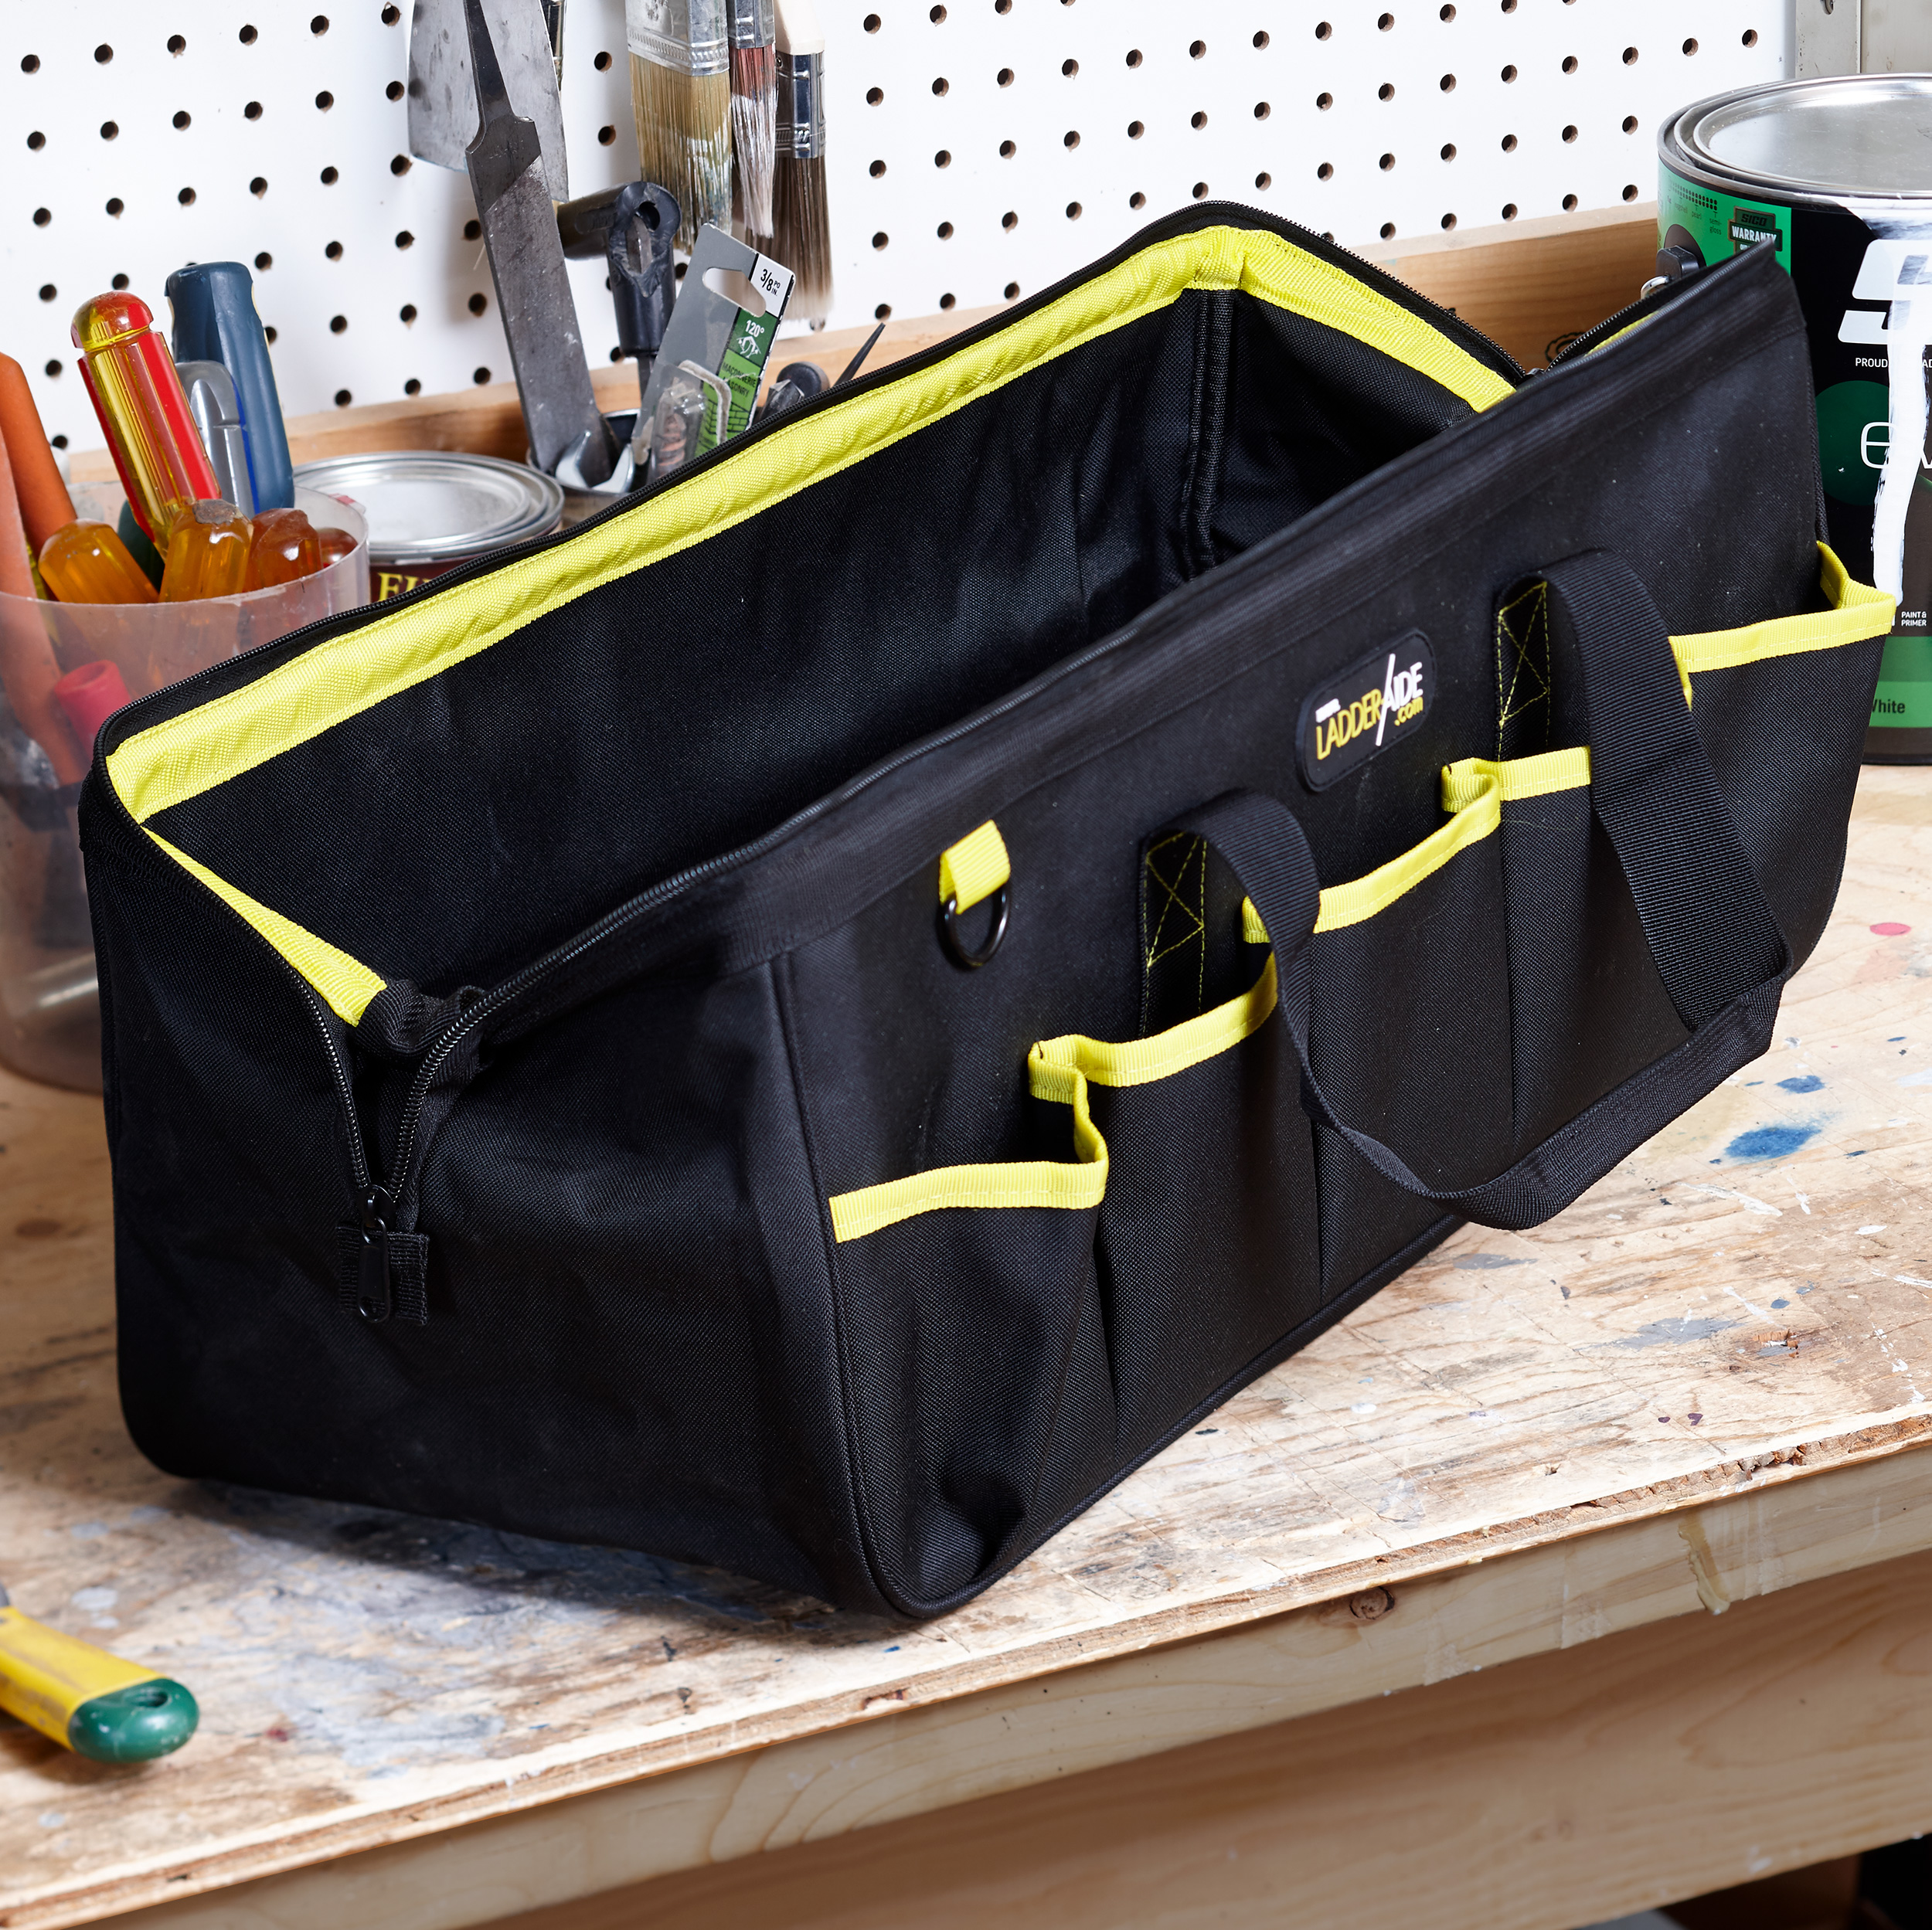 Ladder-Aide PRO Tool Bag